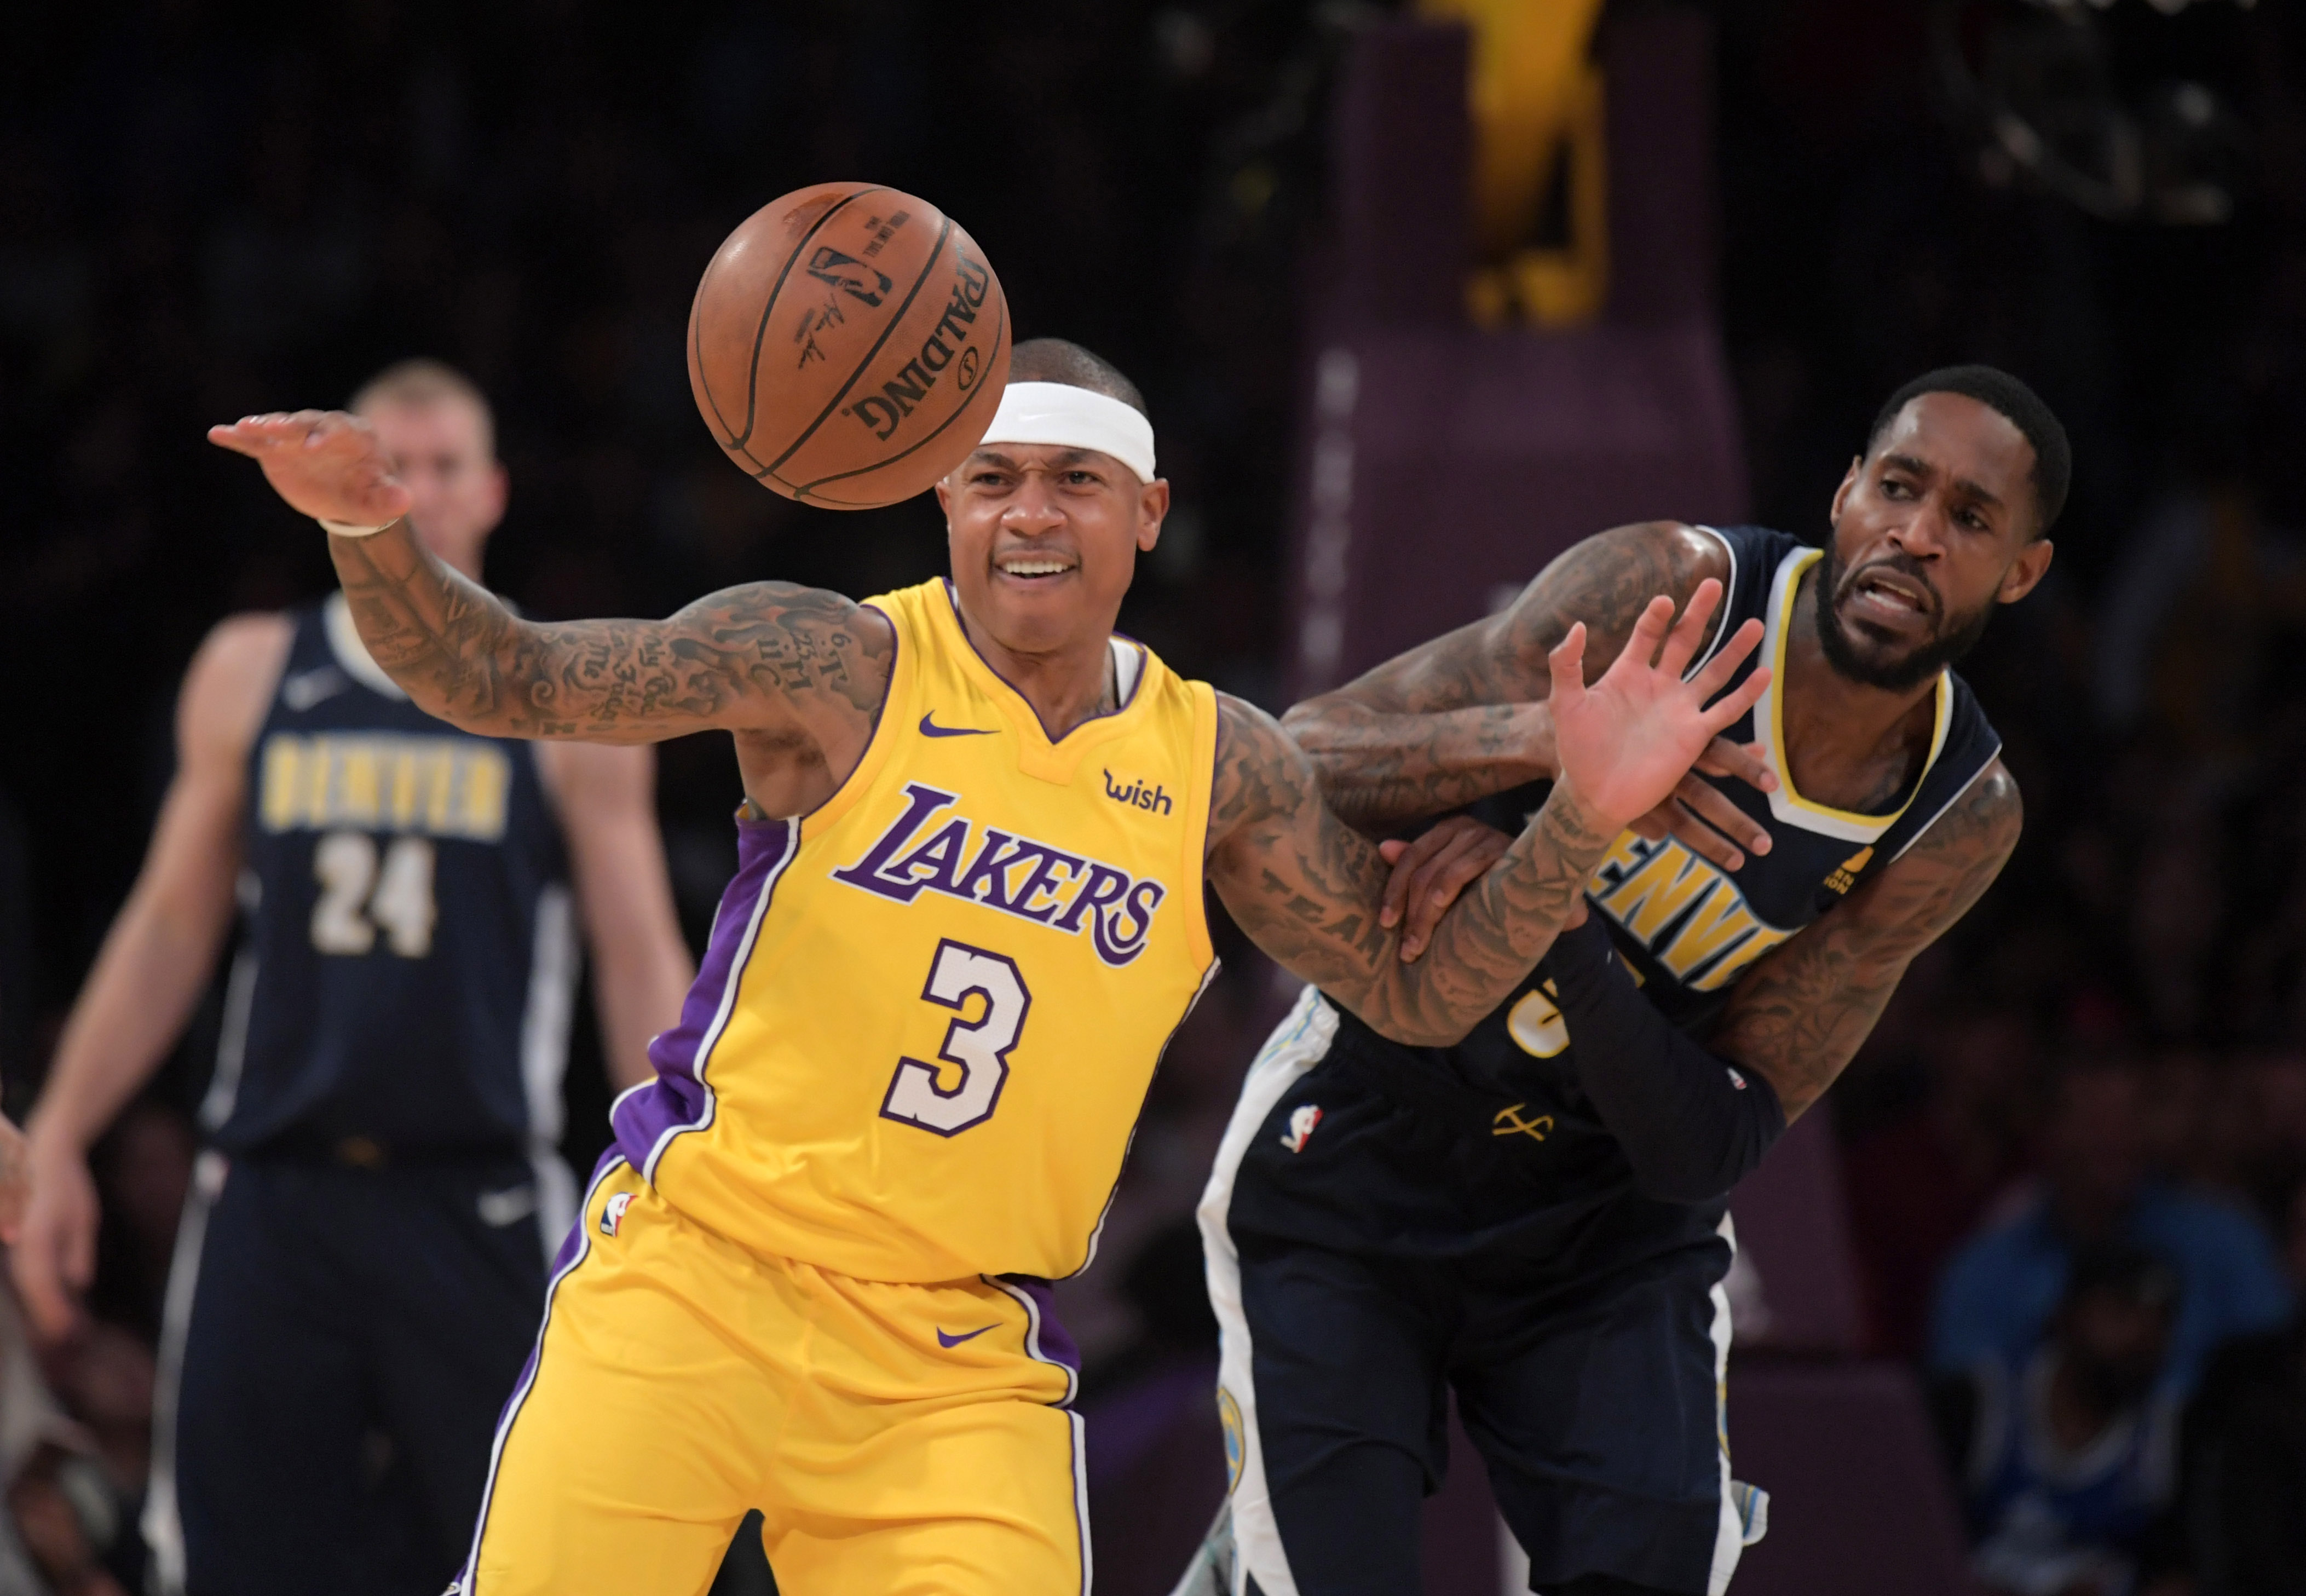 Los Angeles Lakers guard Isaiah Thomas (3) and Denver Nuggets forward Will Barton (5) battle for the ball in the first half during an NBA basketball game at Staples Center. The Lakers defeated the Nuggets 112-103.